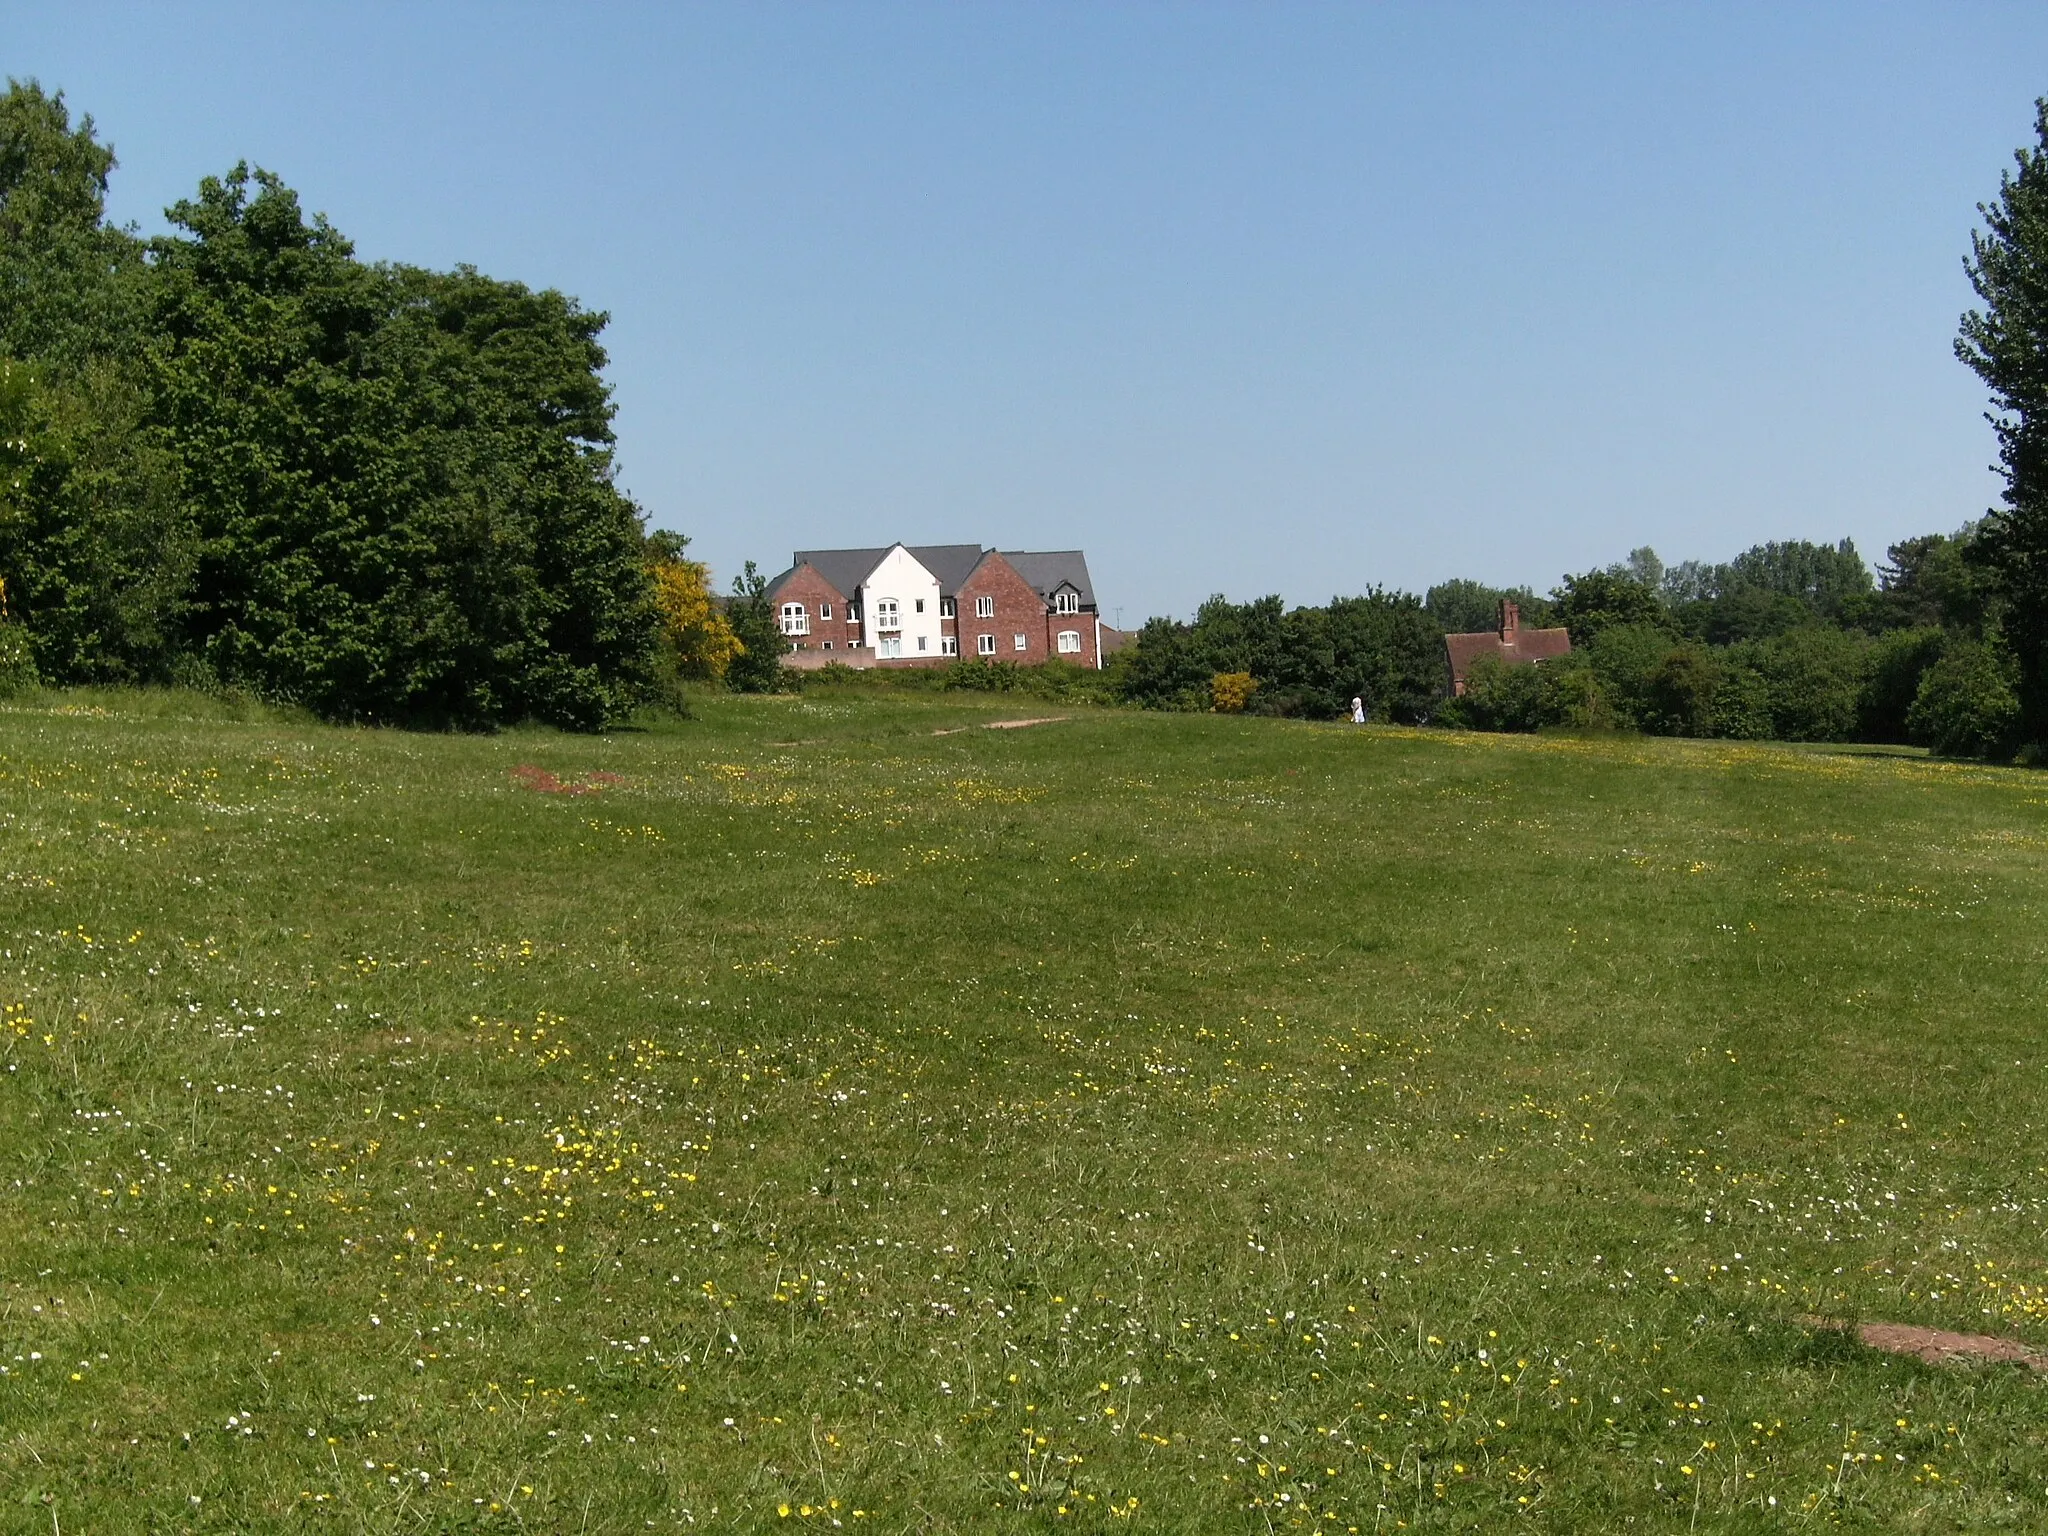 Photo showing: Ham Meadow, Wombourne, South Staffordshire, England, viewed towards the village centre.